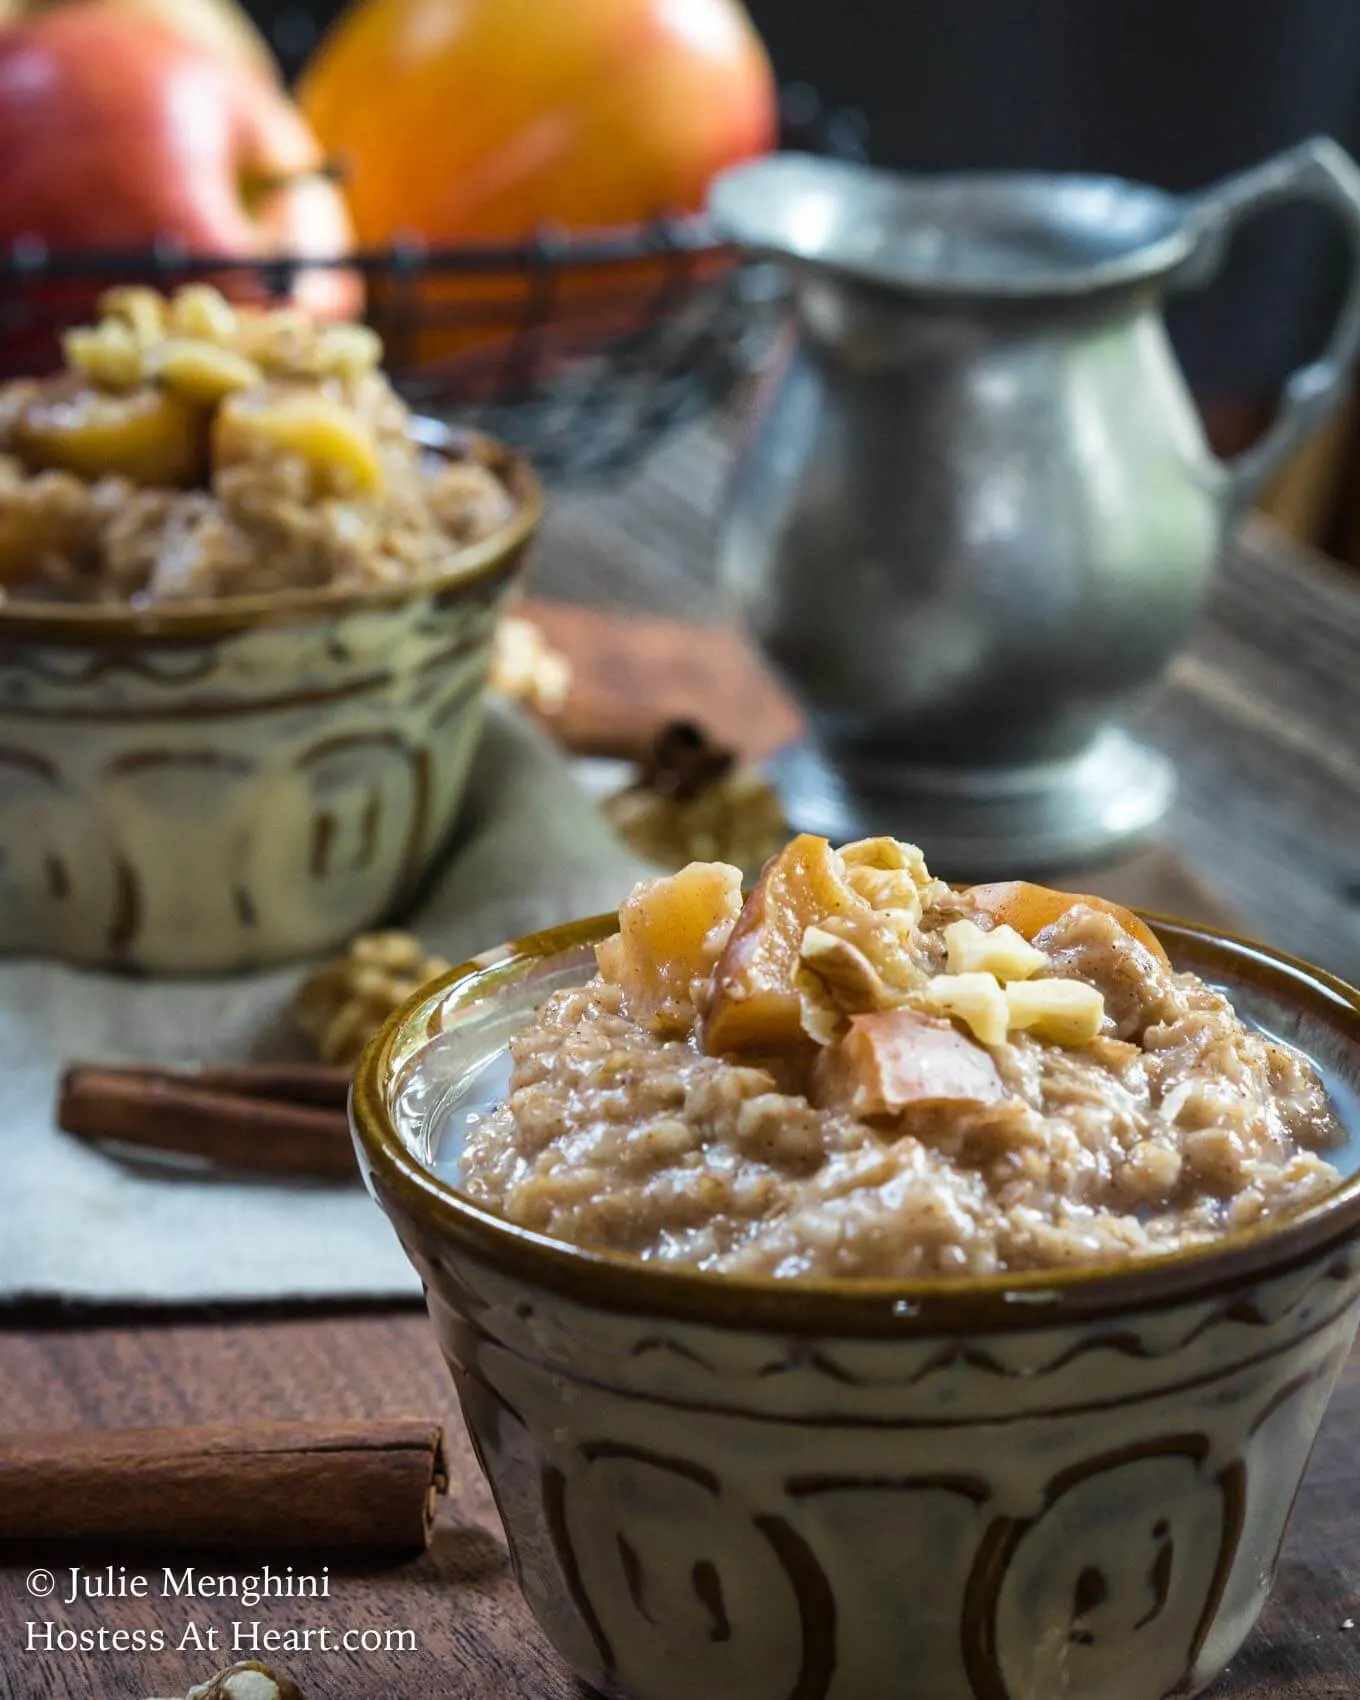 Side view of a bowl of Spiced Apple Steel Cut Oats sitting on a wooden cutting board. The bowl is sprinkled with nuts and raw apples. A spoon sits next to the bowl and another bowl and a pitcher of milk sits in the background.